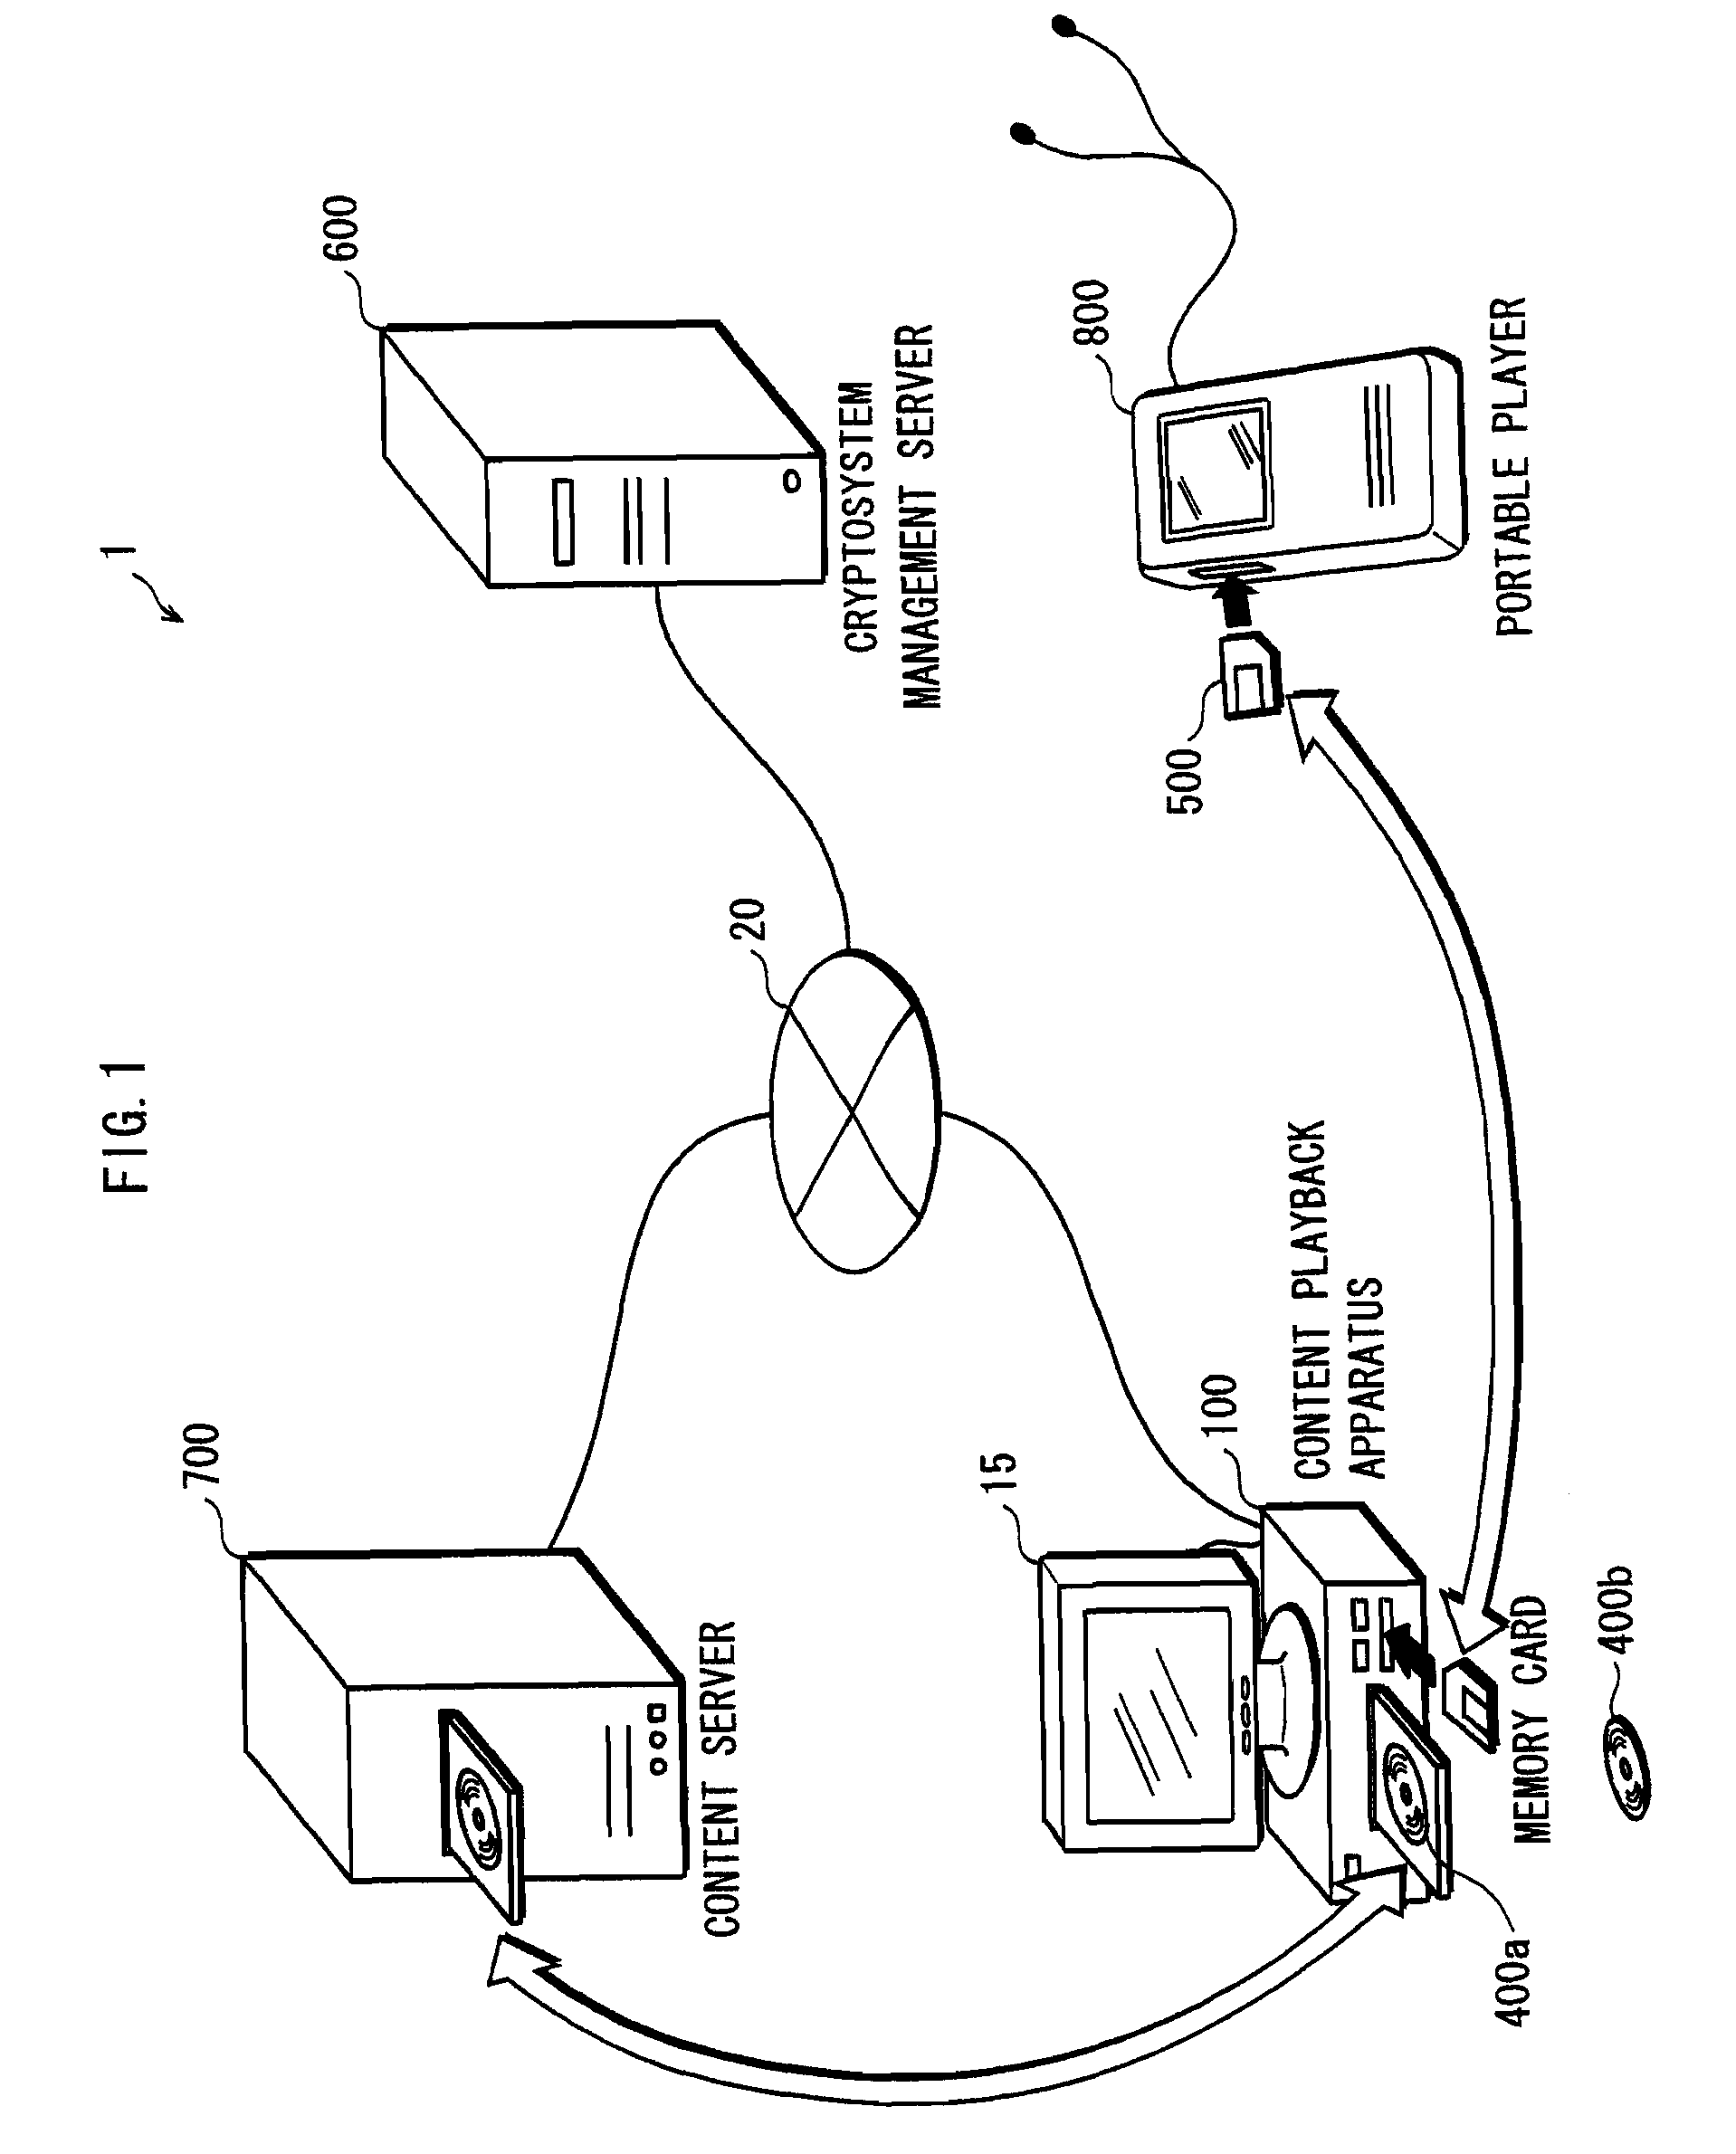 Information security device